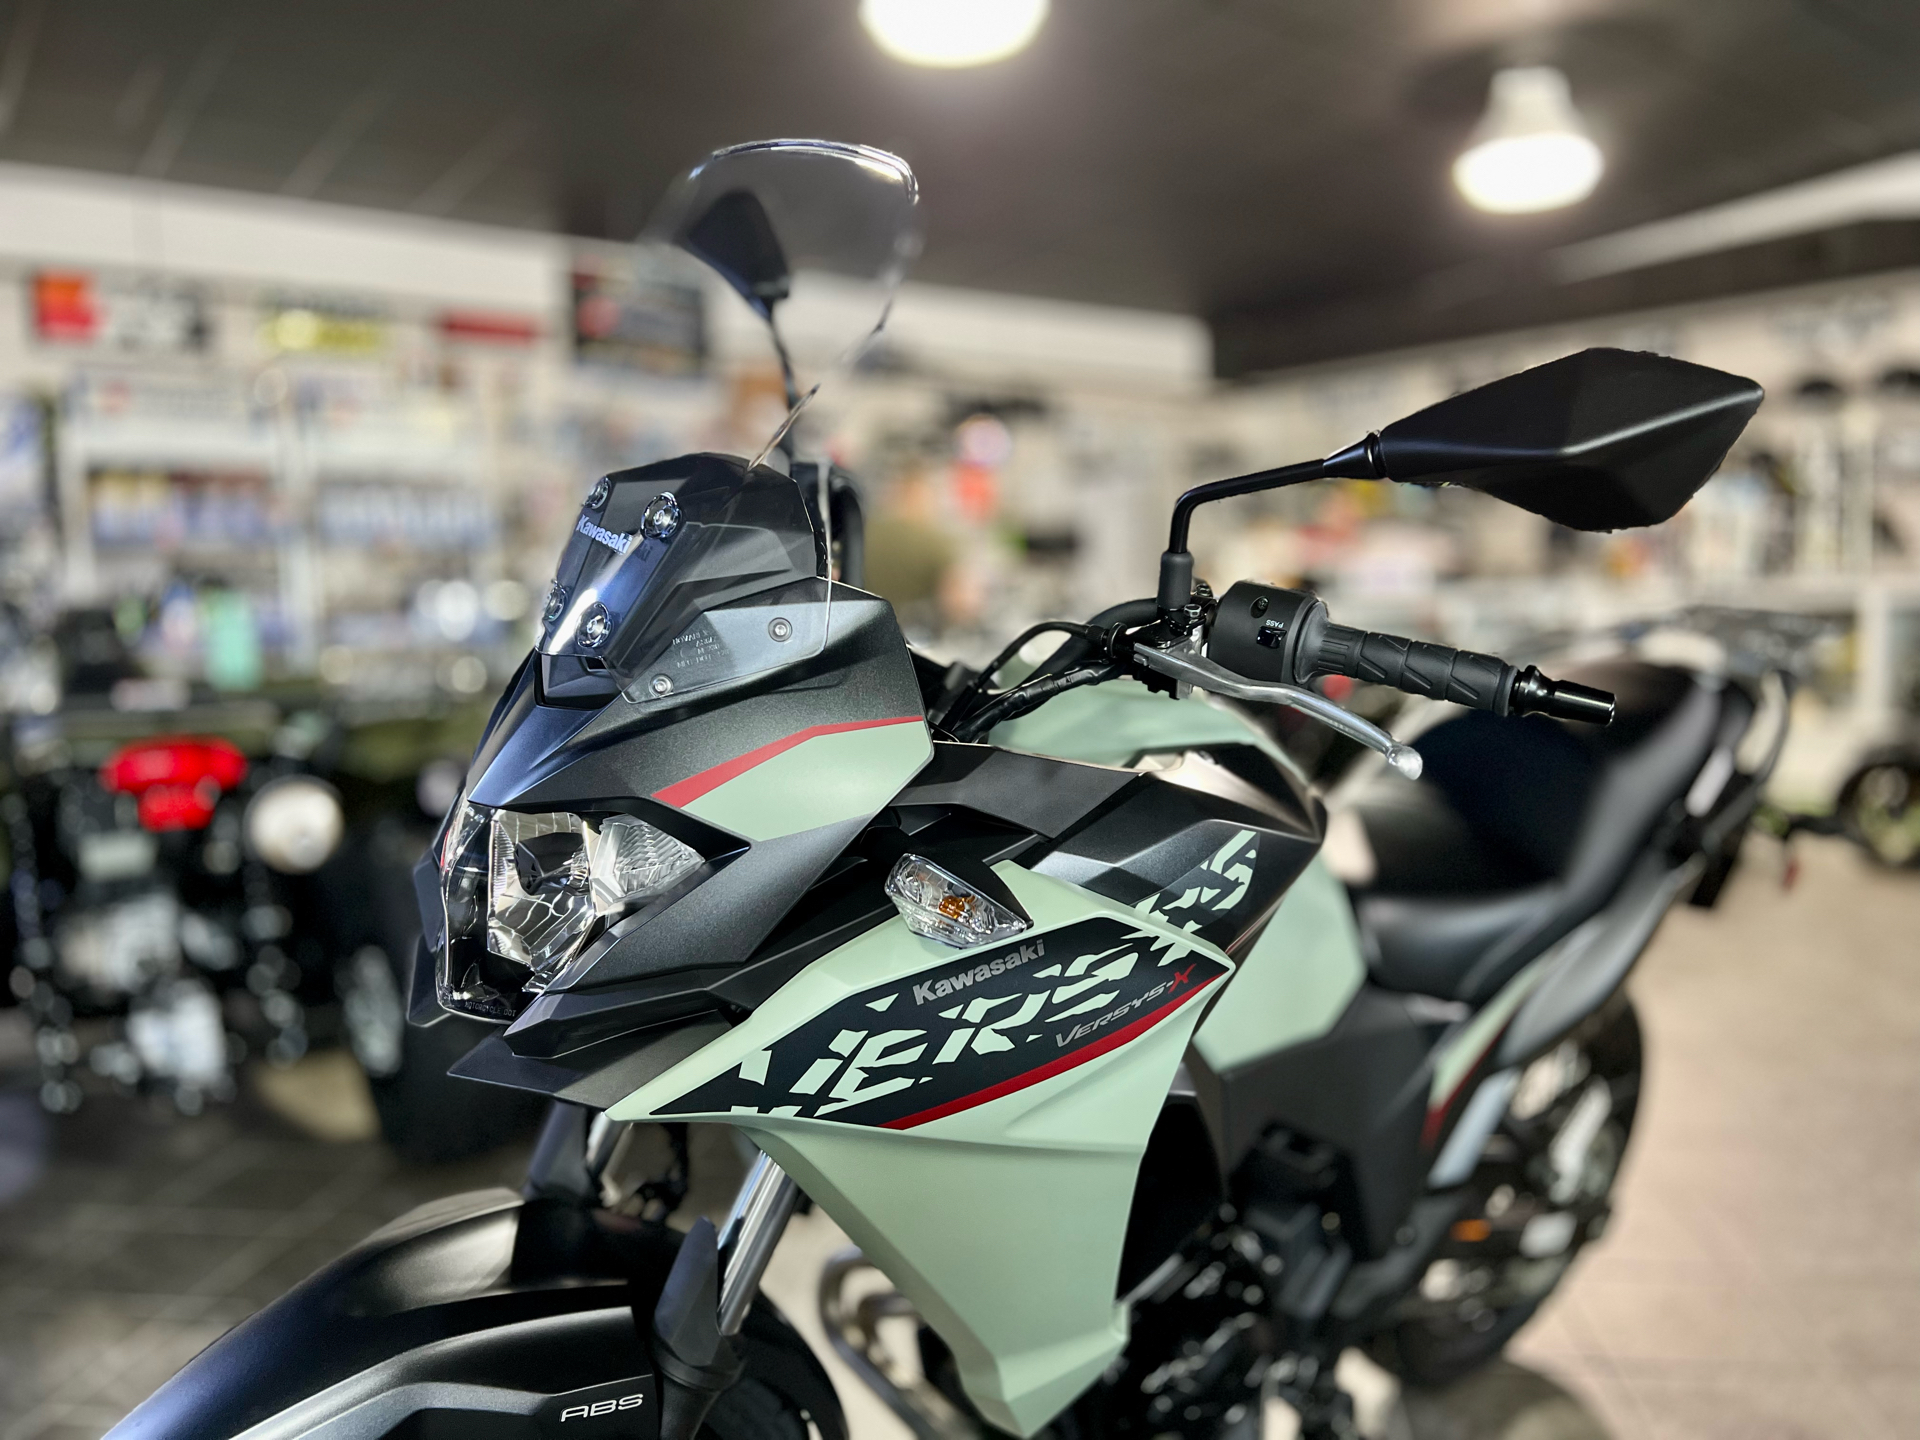 2023 Kawasaki Versys-X 300 ABS in Gulfport, Mississippi - Photo 14